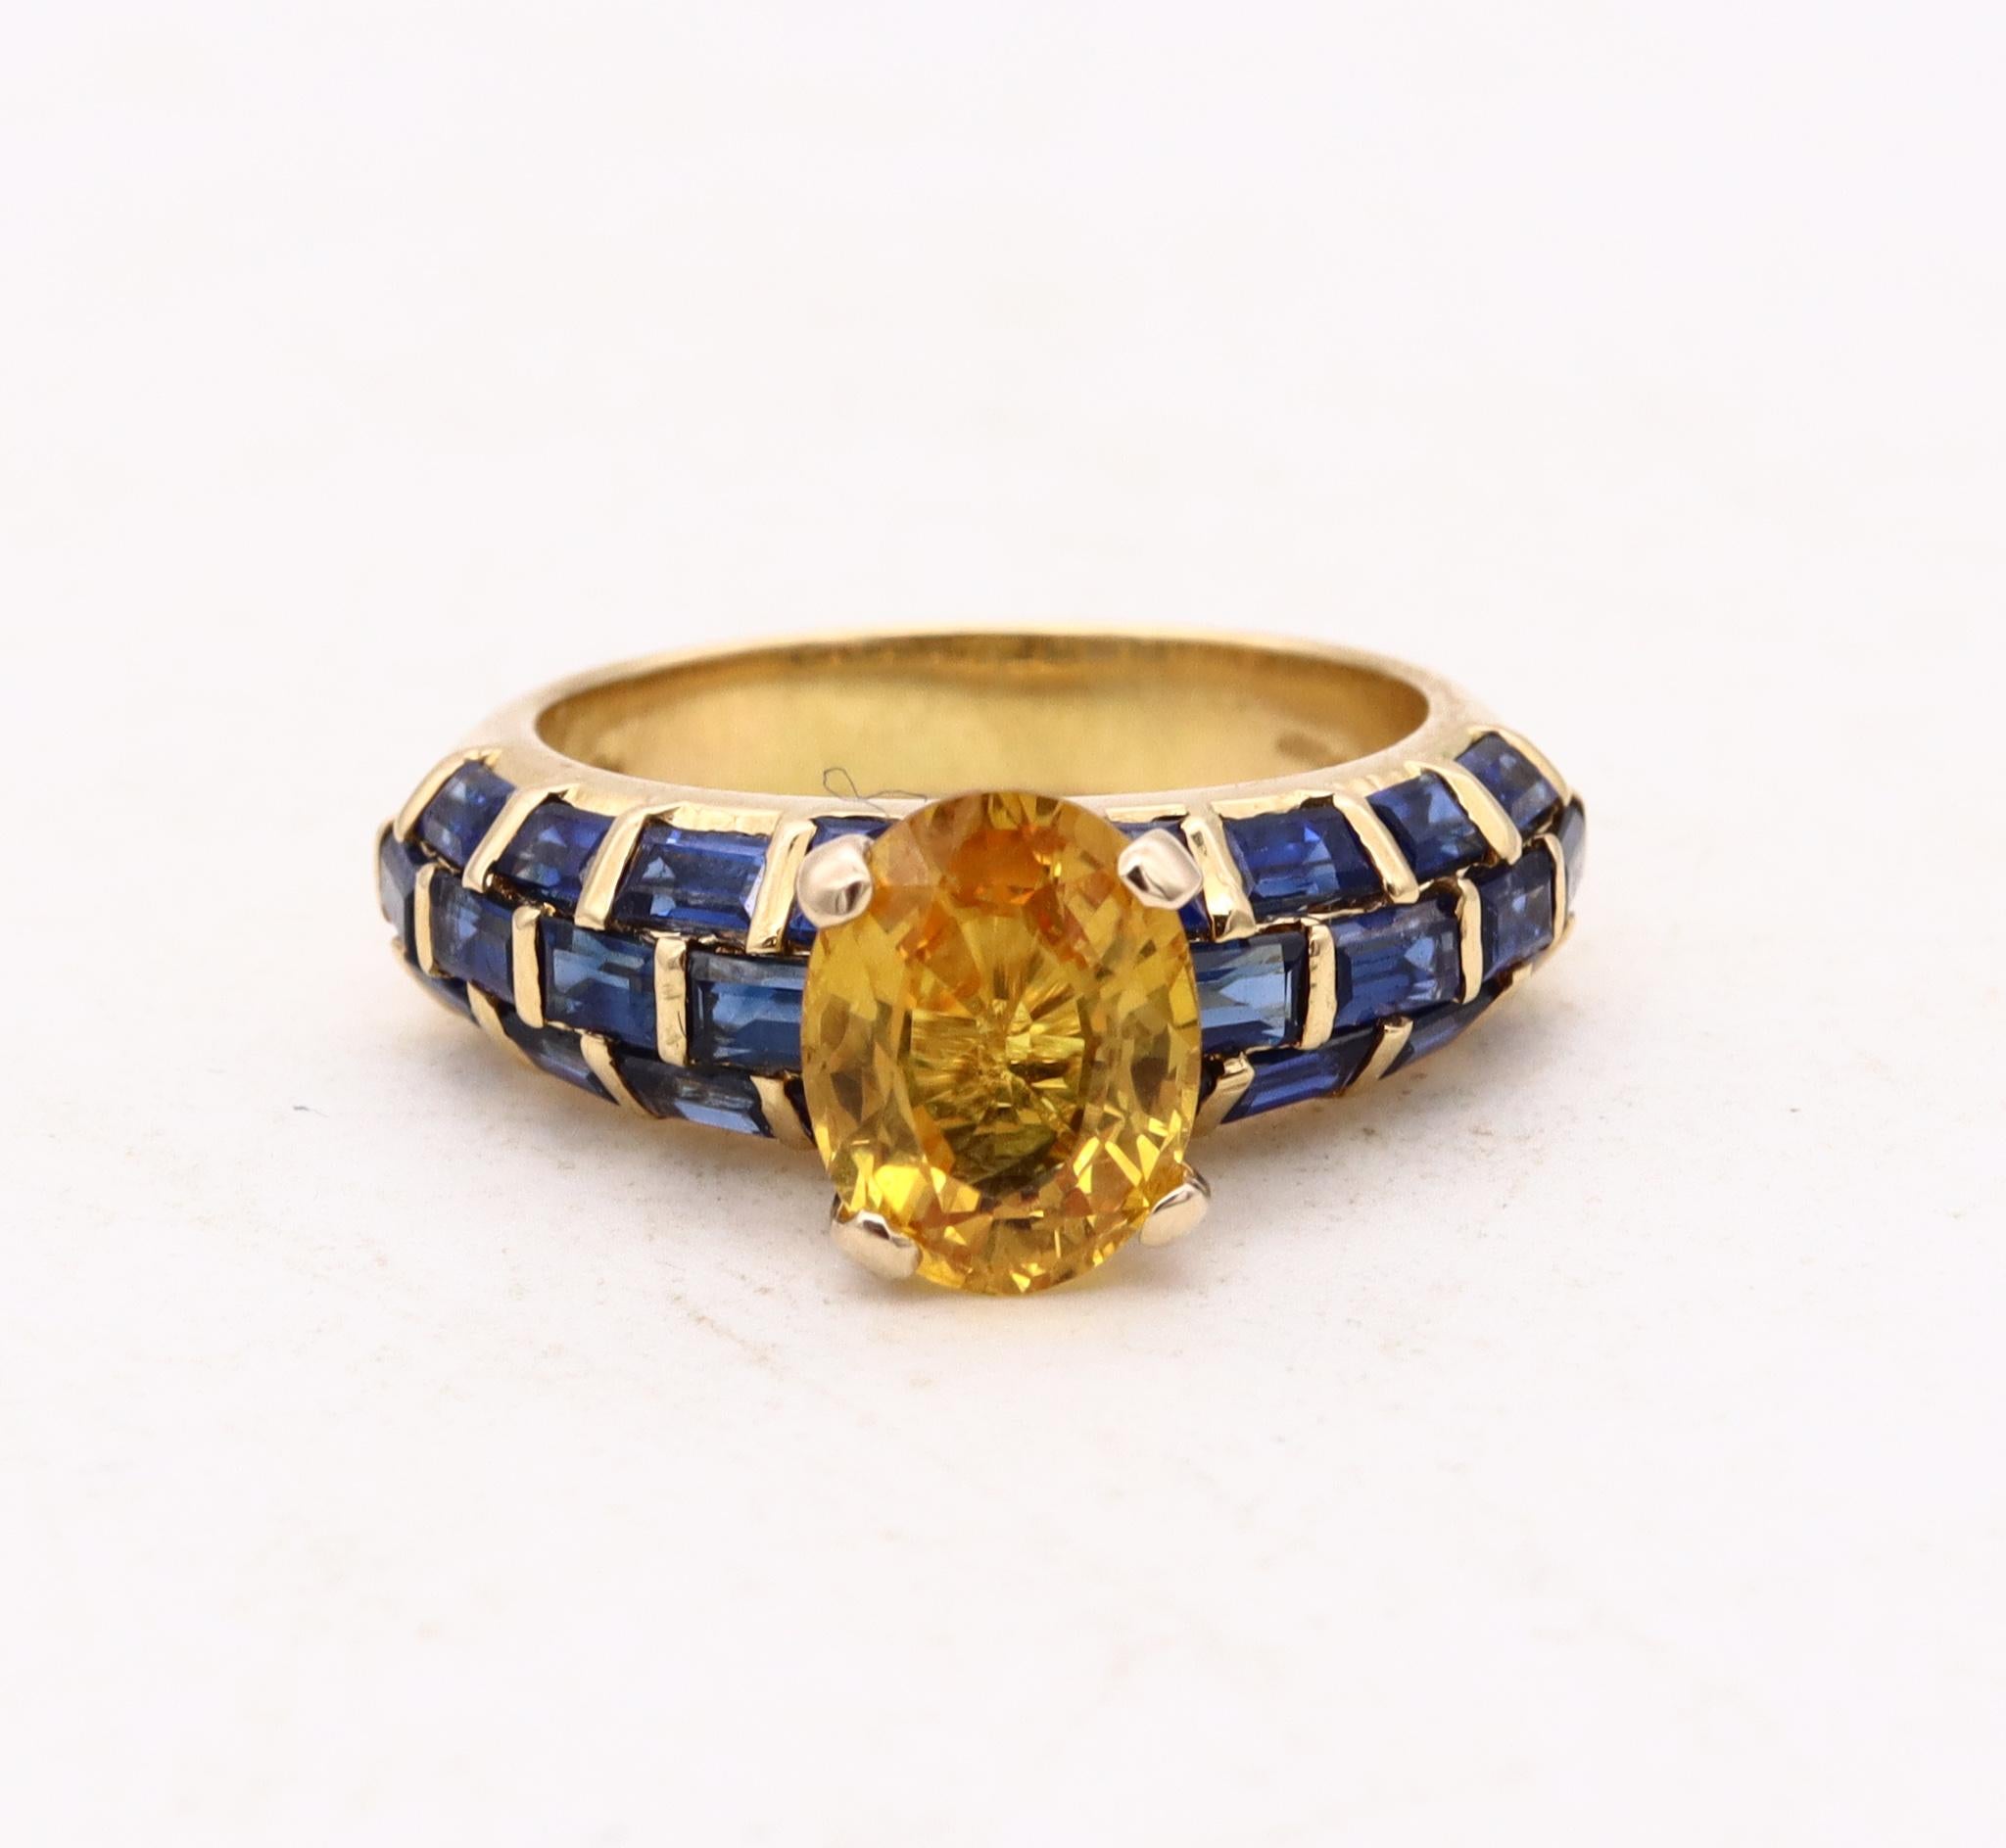 Women's Sabbadini Milano Jeweled Ring 18kt Gold with 4.49 Cts Blue and Yellow Sapphires